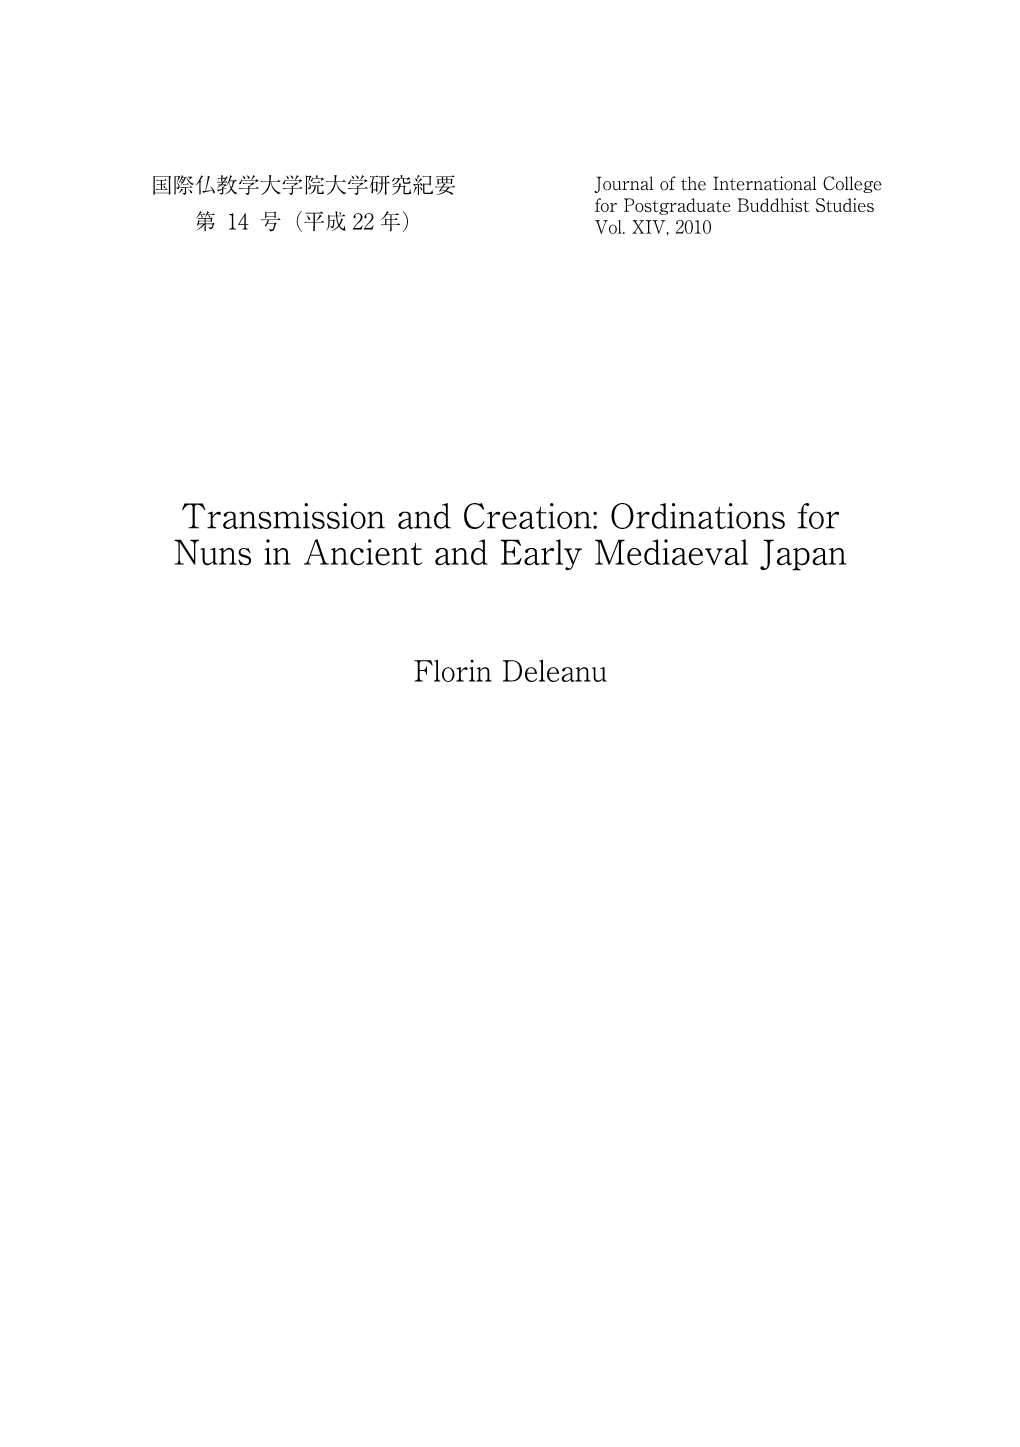 Ordinations for Nuns in Ancient and Early Mediaeval Japan